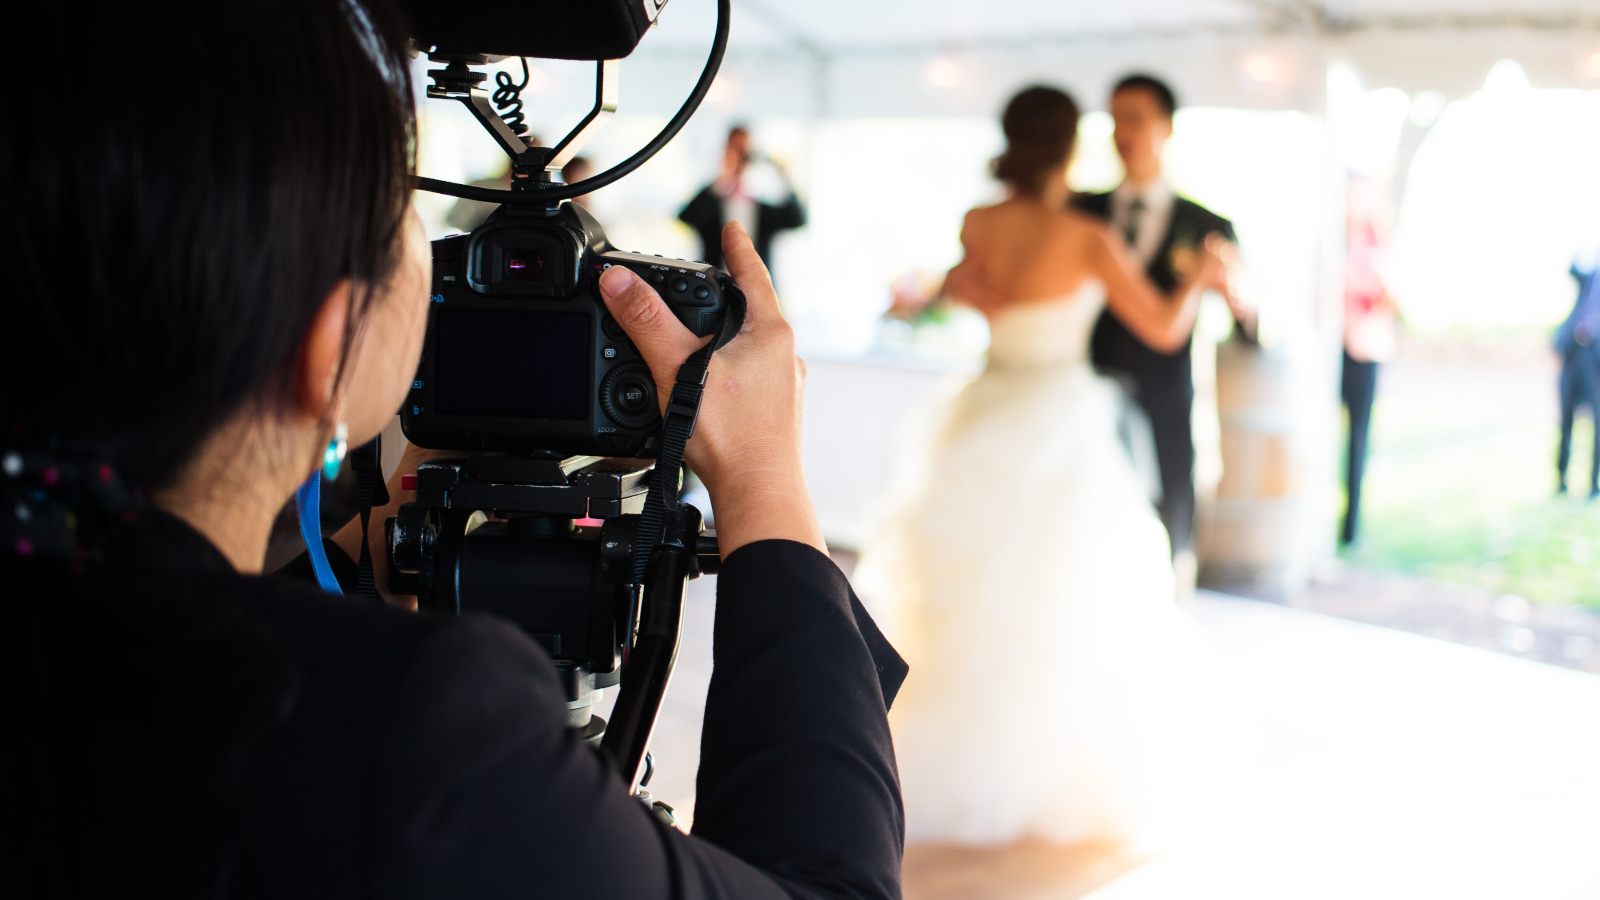 This attempt to call out a wedding photographer completely backfired